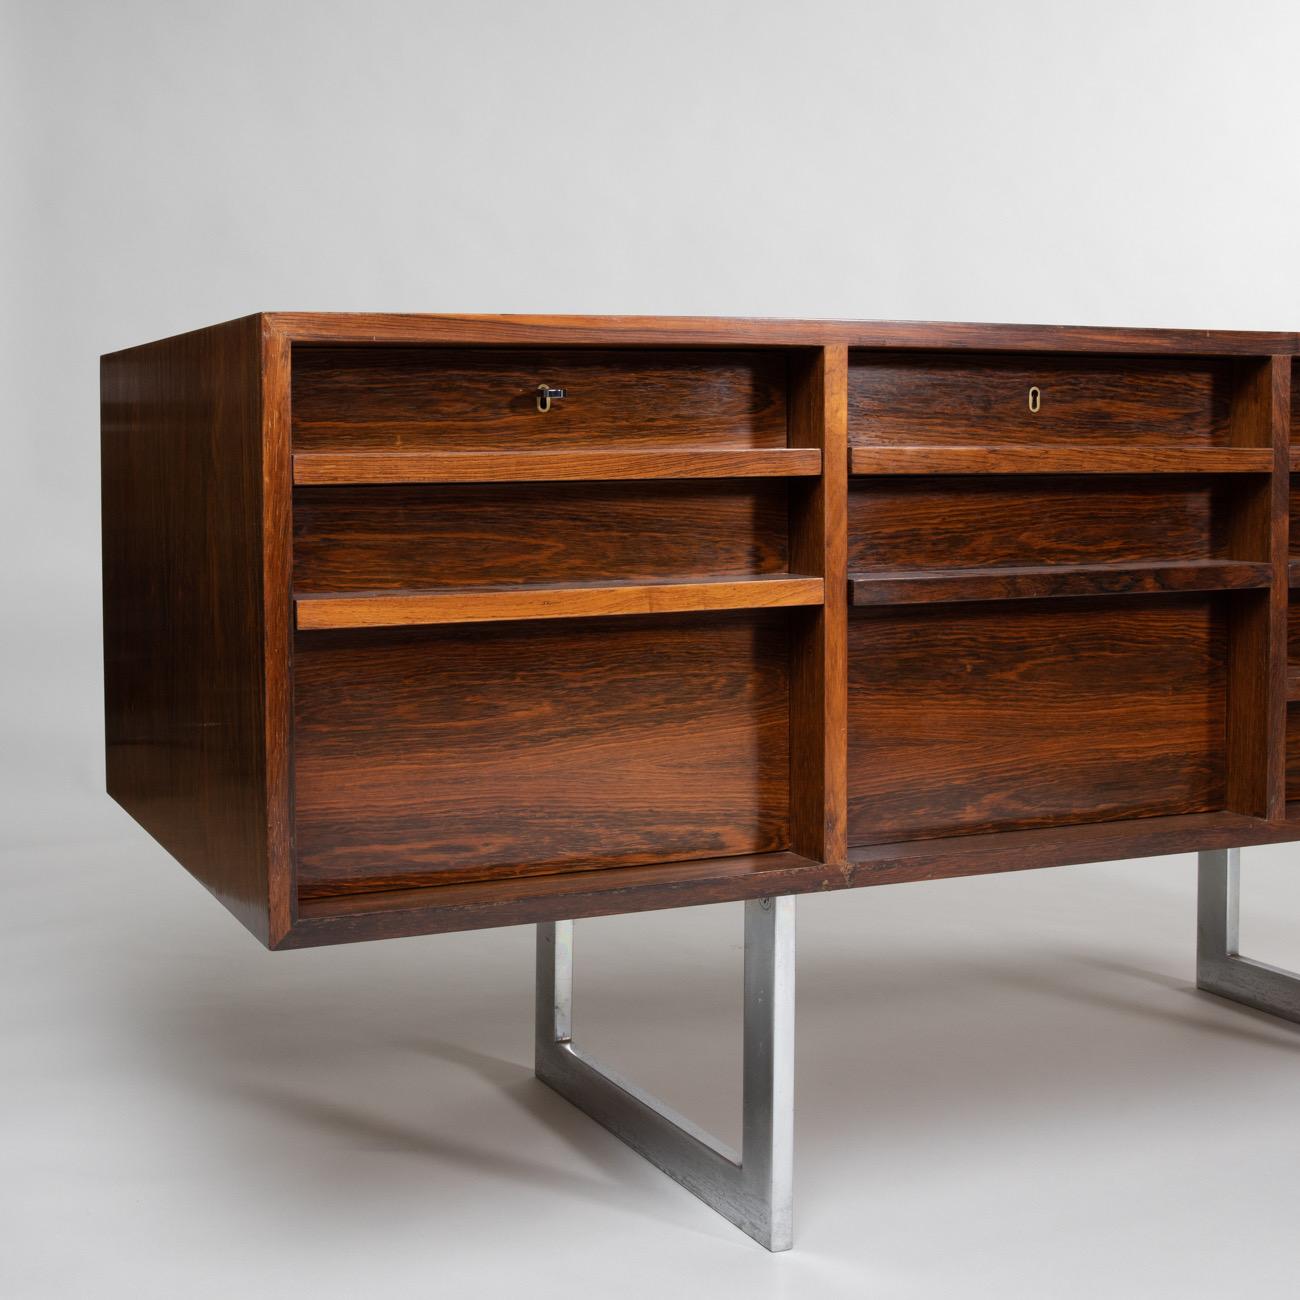 Sideboard resting on chrome legs, also called Credenza.
Designed by Bodil Kjaer in the early 1960s, this piece of furniture is part of the same series as the iconic desk complement found in several James Bond films.
From Russia with Love;
You